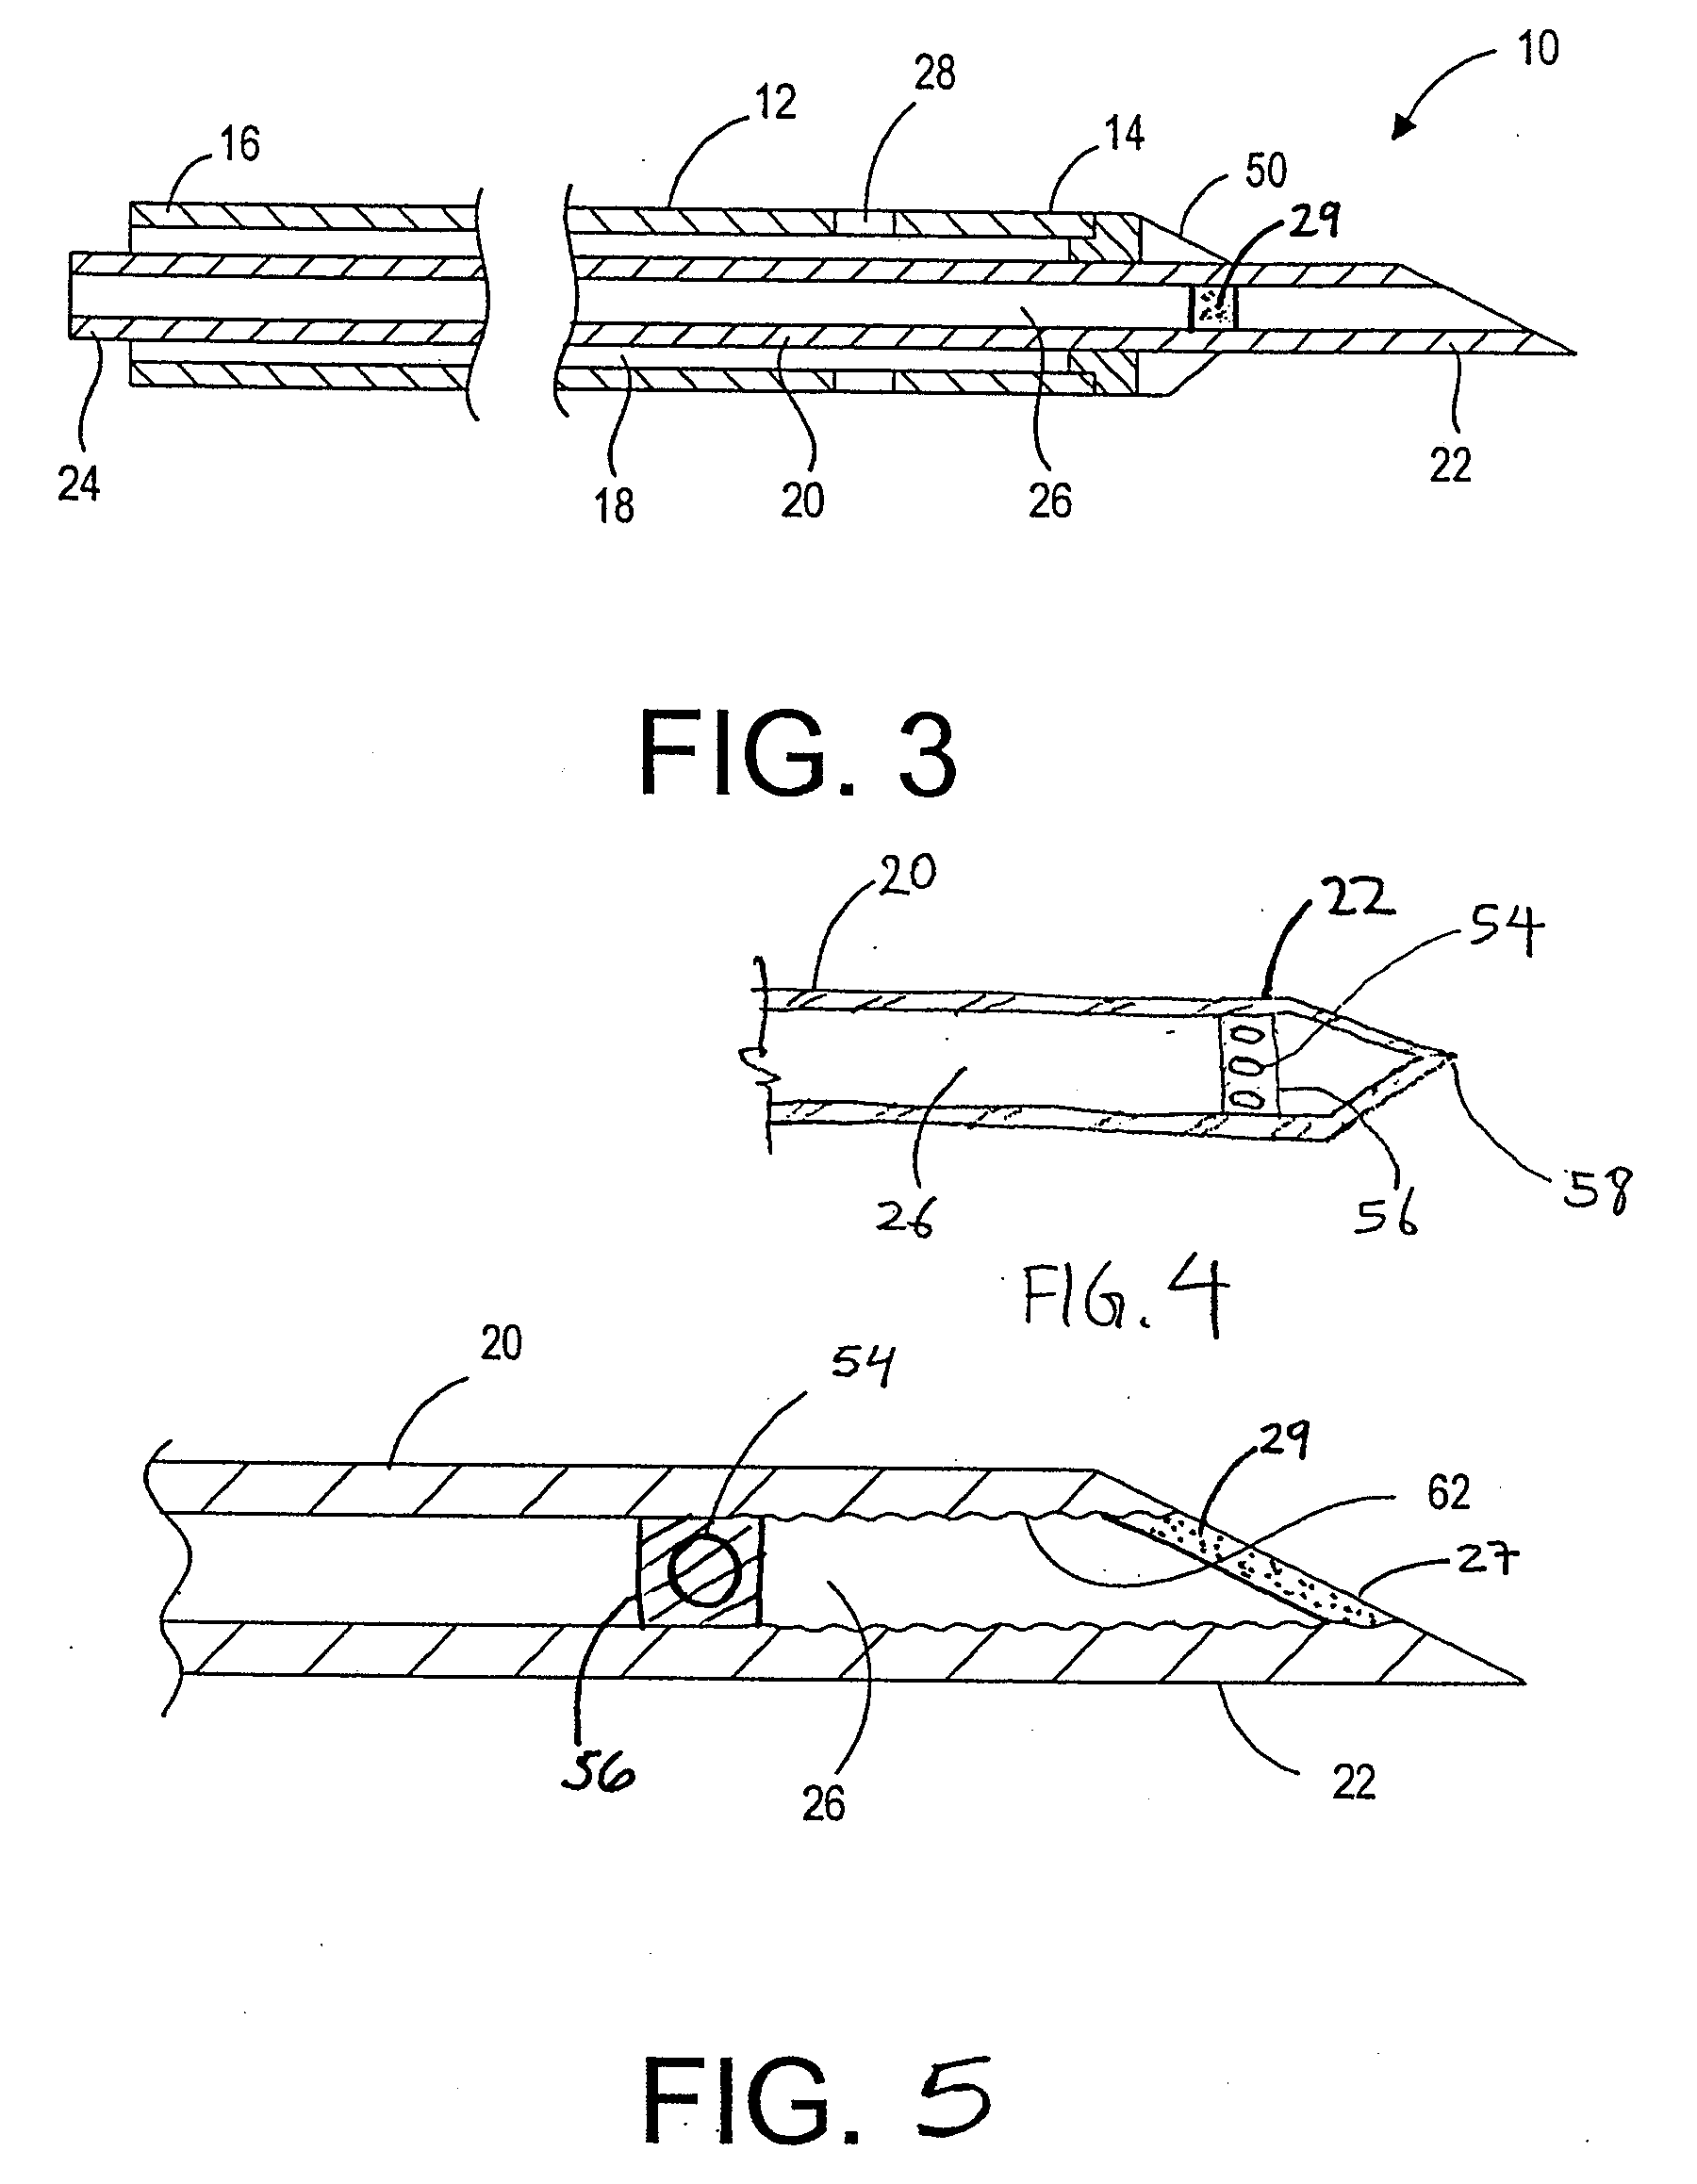 Method for delivering therapeutic or diagnostic agents